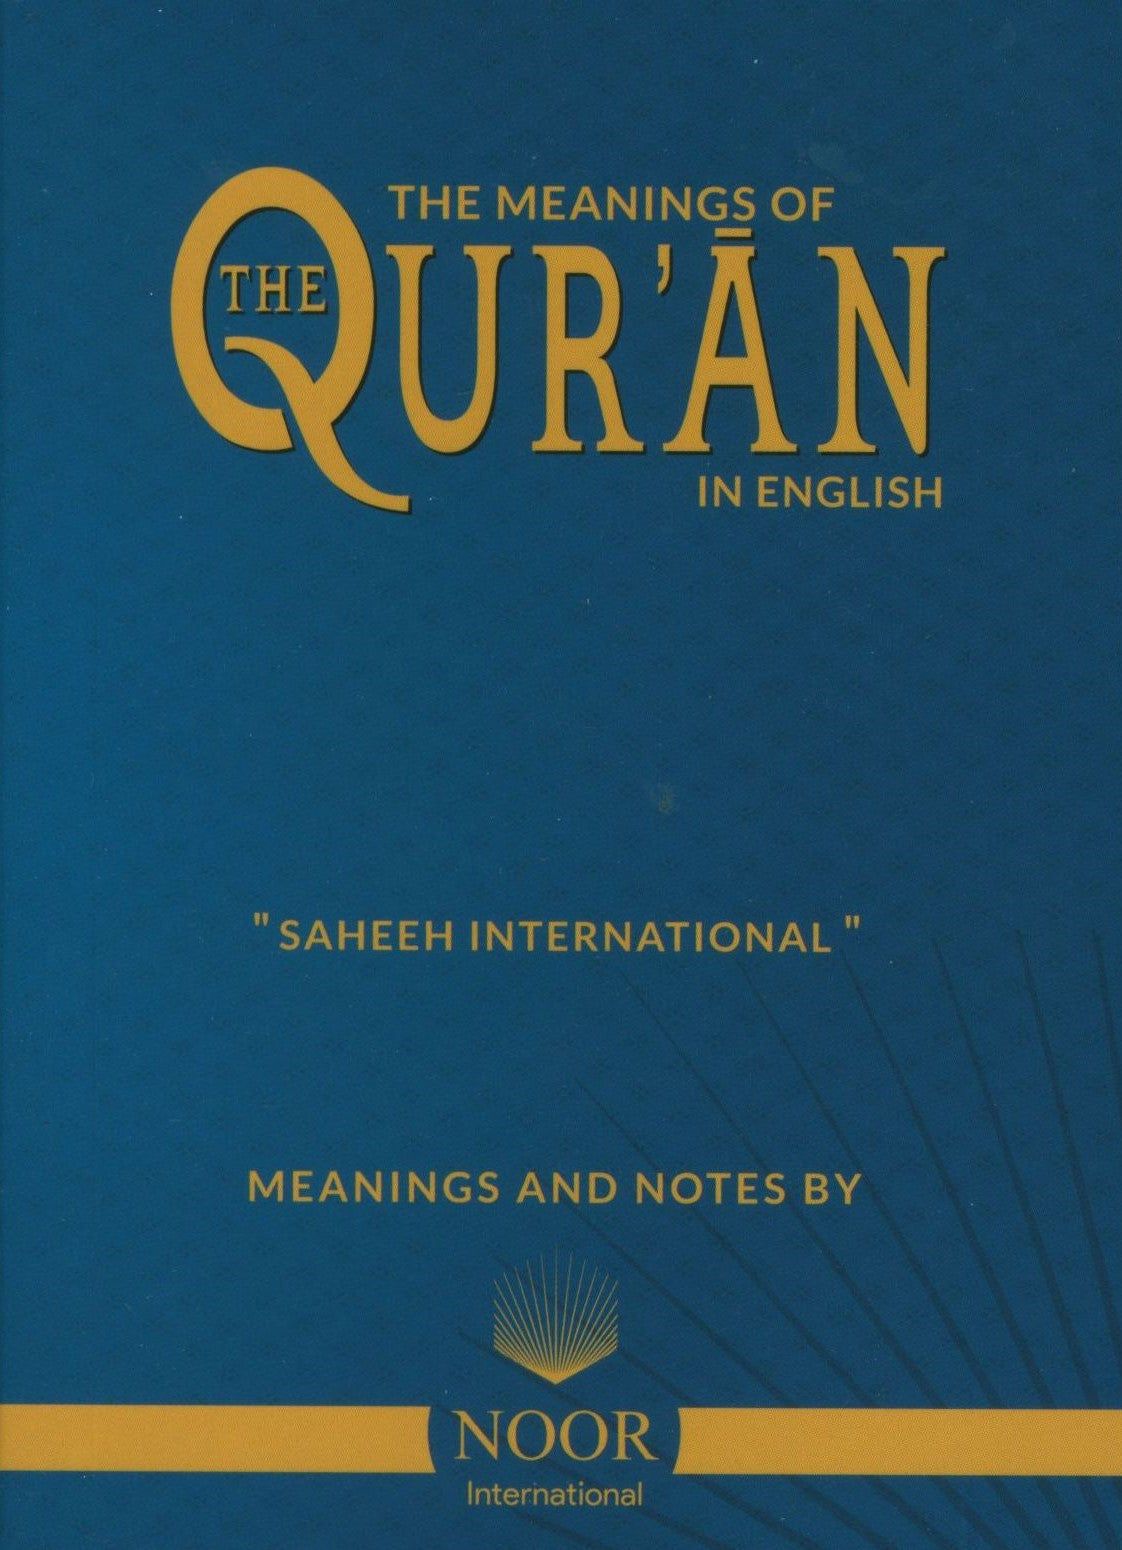 The Meanings of The Qur'an in English - Pocket Size